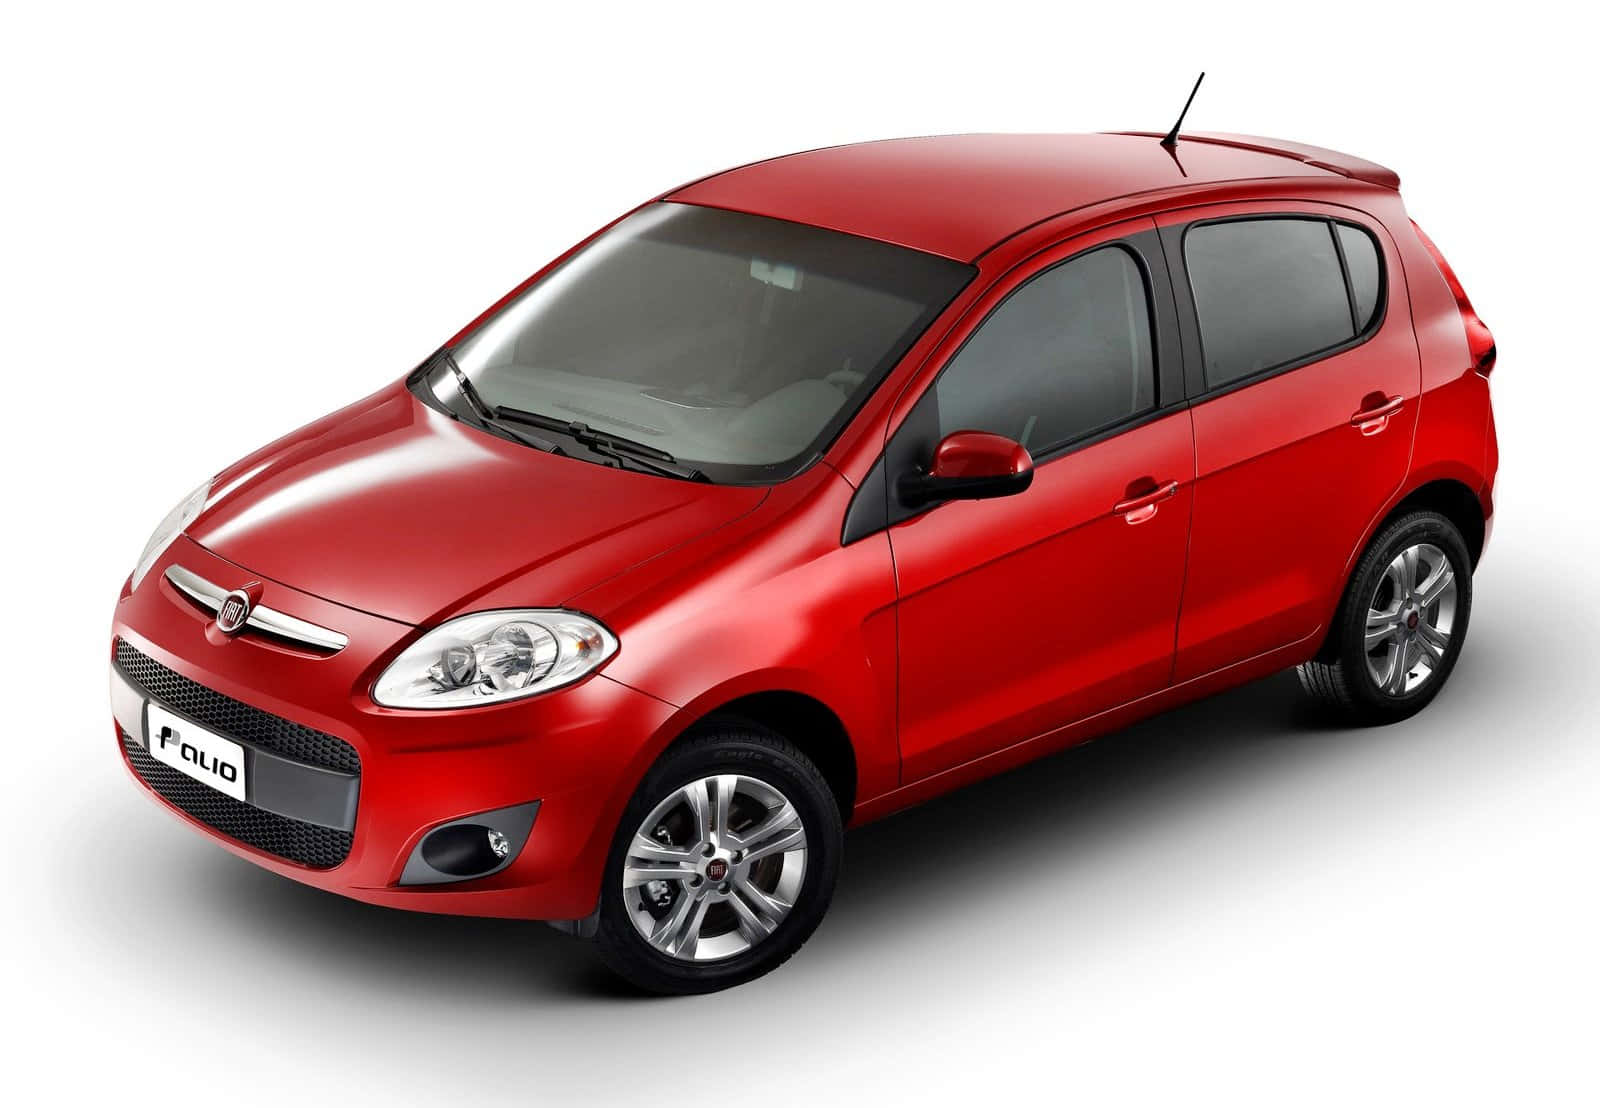 Sleek and Stylish Fiat Palio in Action Wallpaper